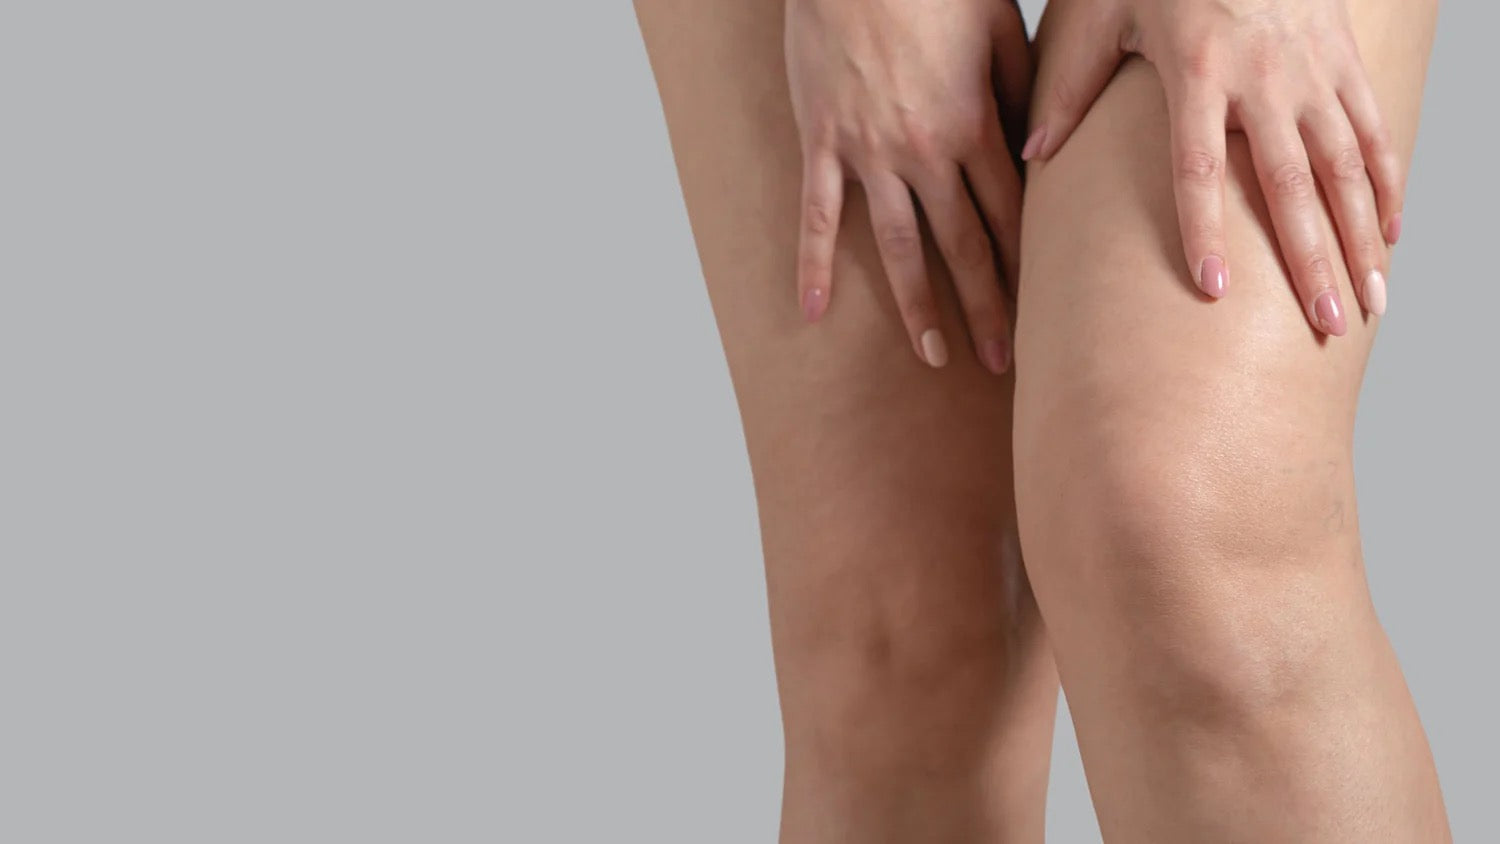 Knee fat: how to eliminate it?